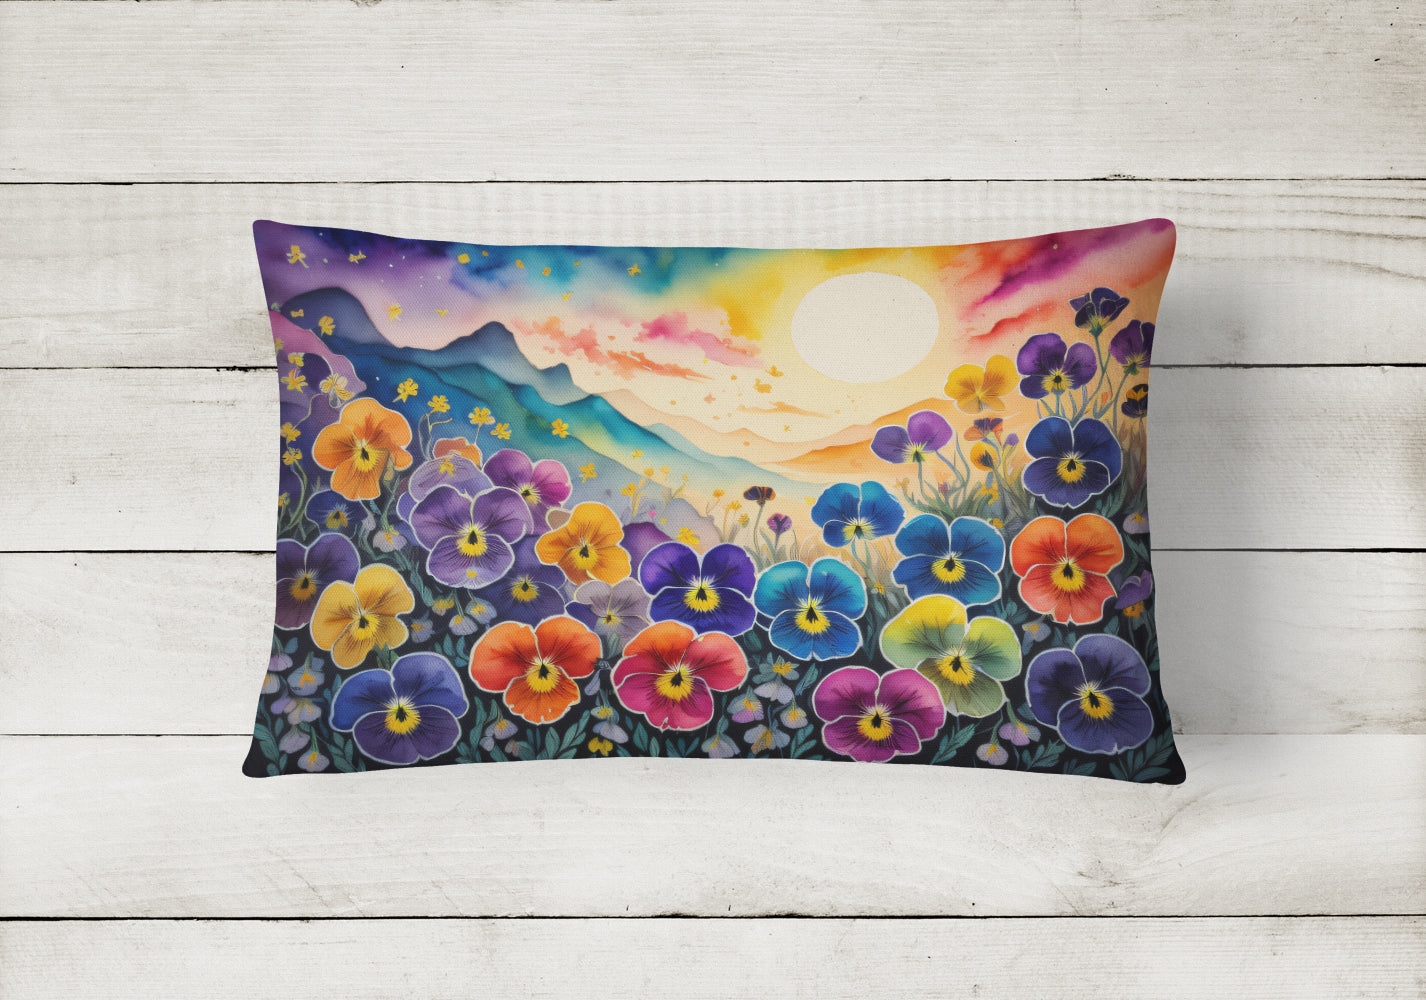 Buy this Pansies in Color Fabric Decorative Pillow